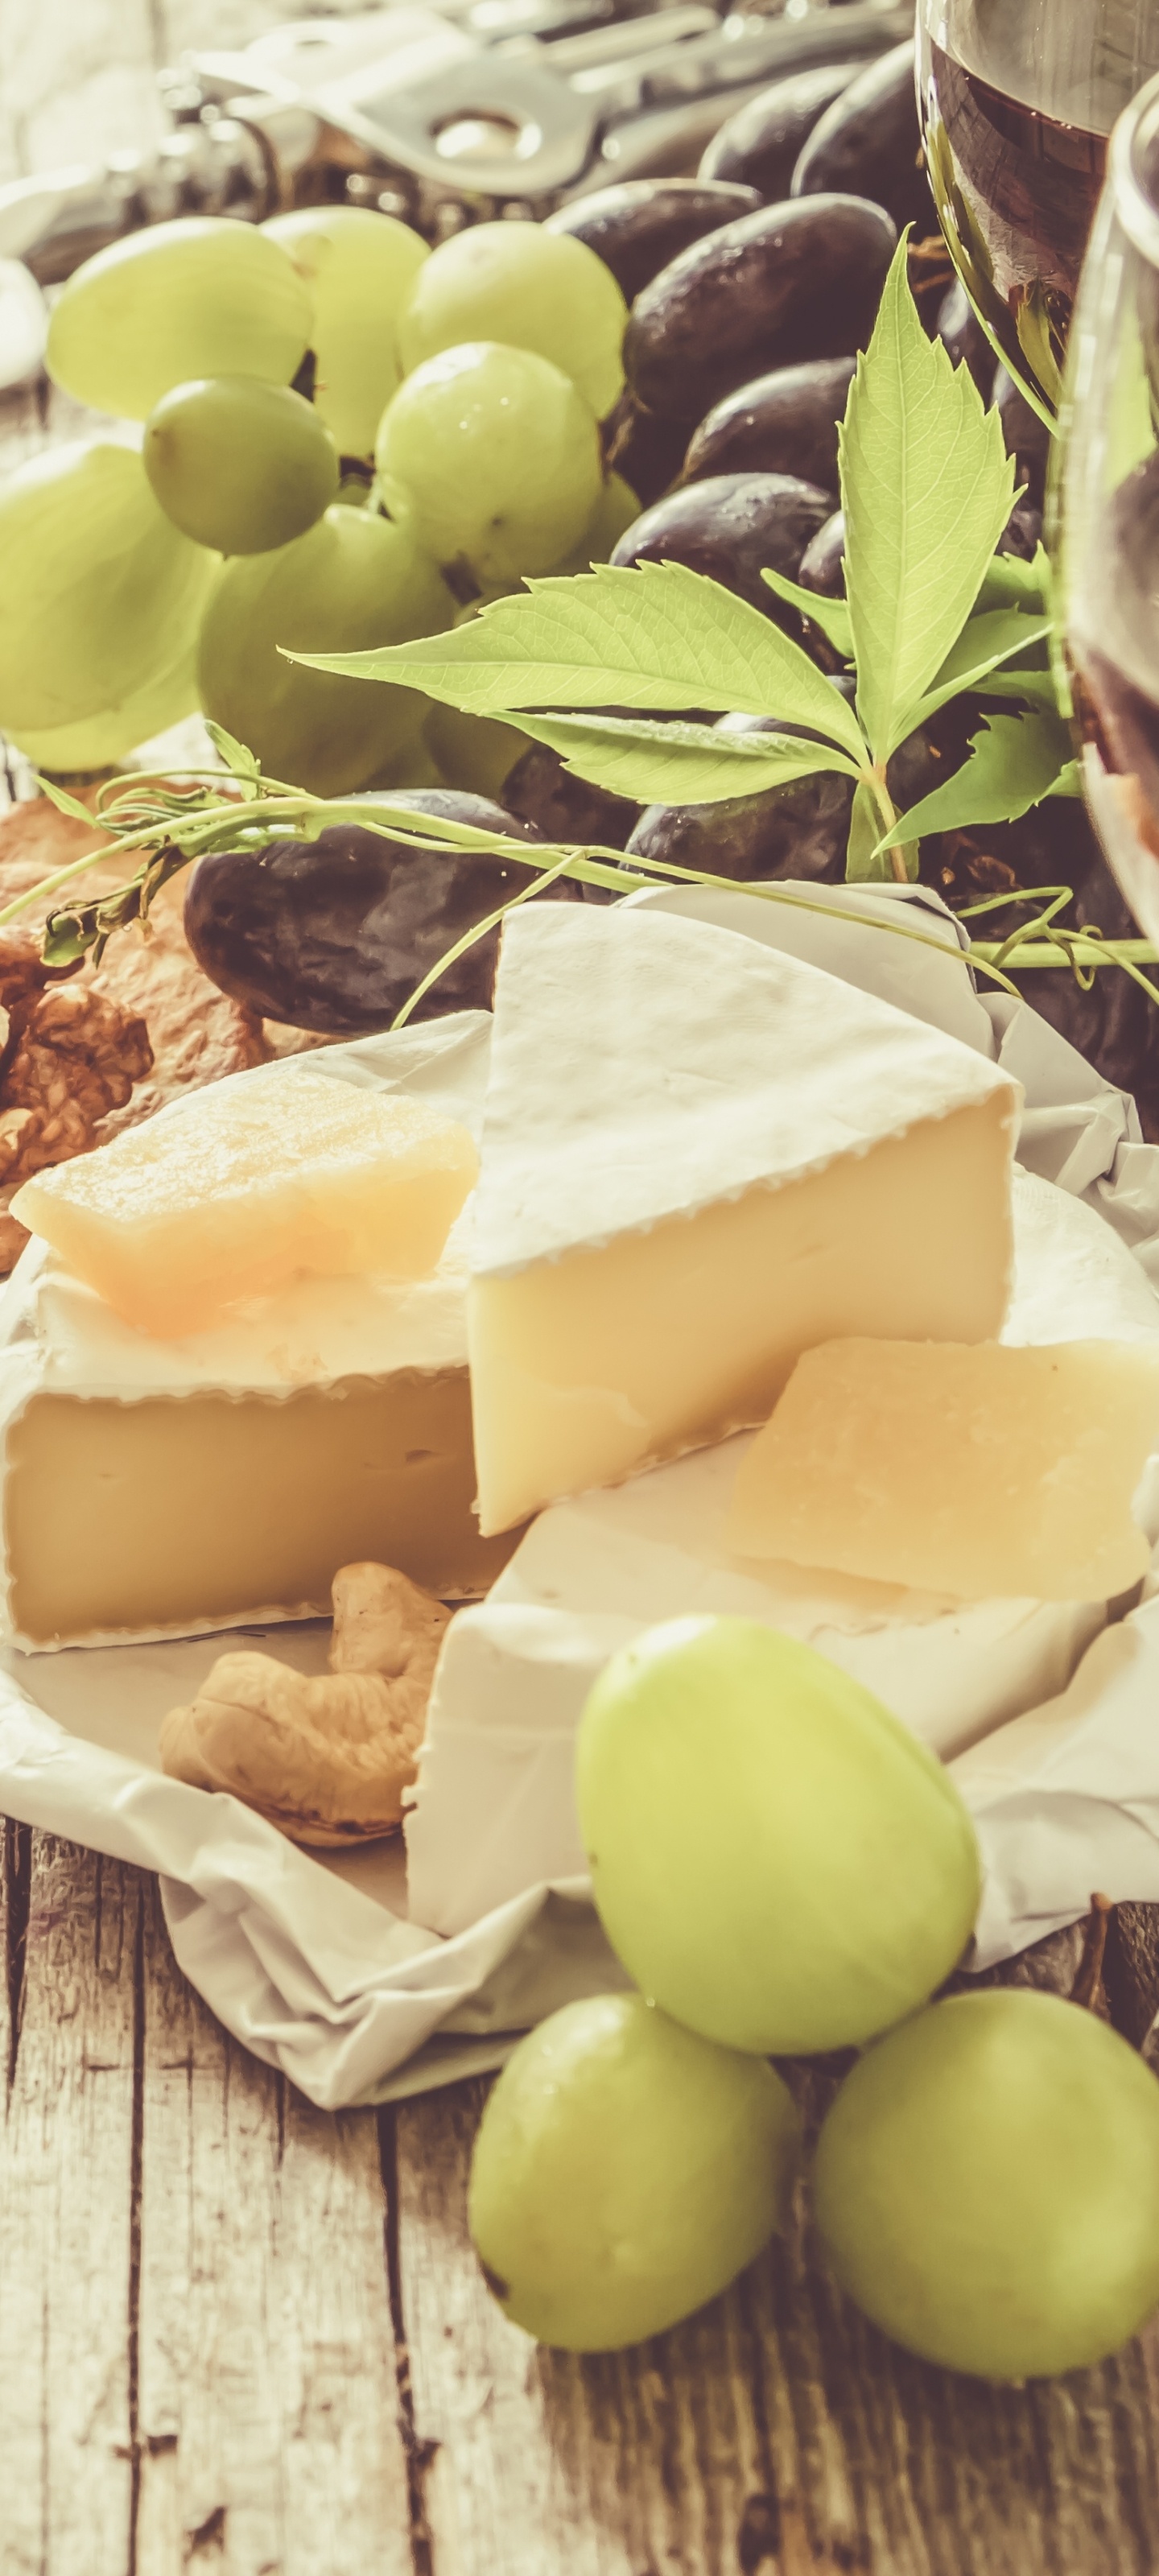 Cheese: Nutritious food consisting primarily the semisolid substance formed when milk curdles. 1440x3200 HD Wallpaper.